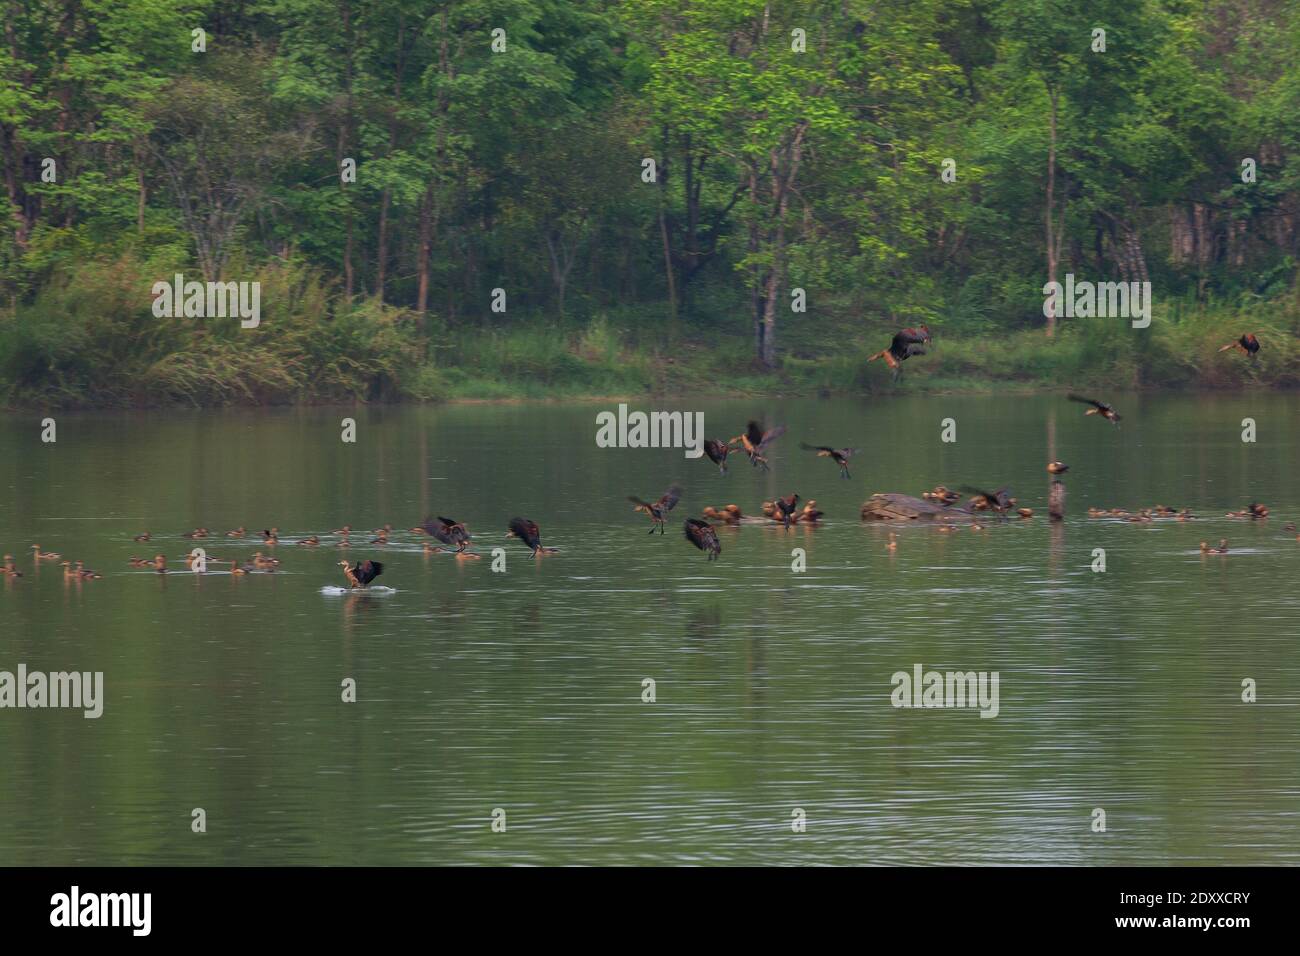 beautiful group of Lesser Whistling Duck flying and activity in raining on lake life and environment of rainforest nature background Stock Photo